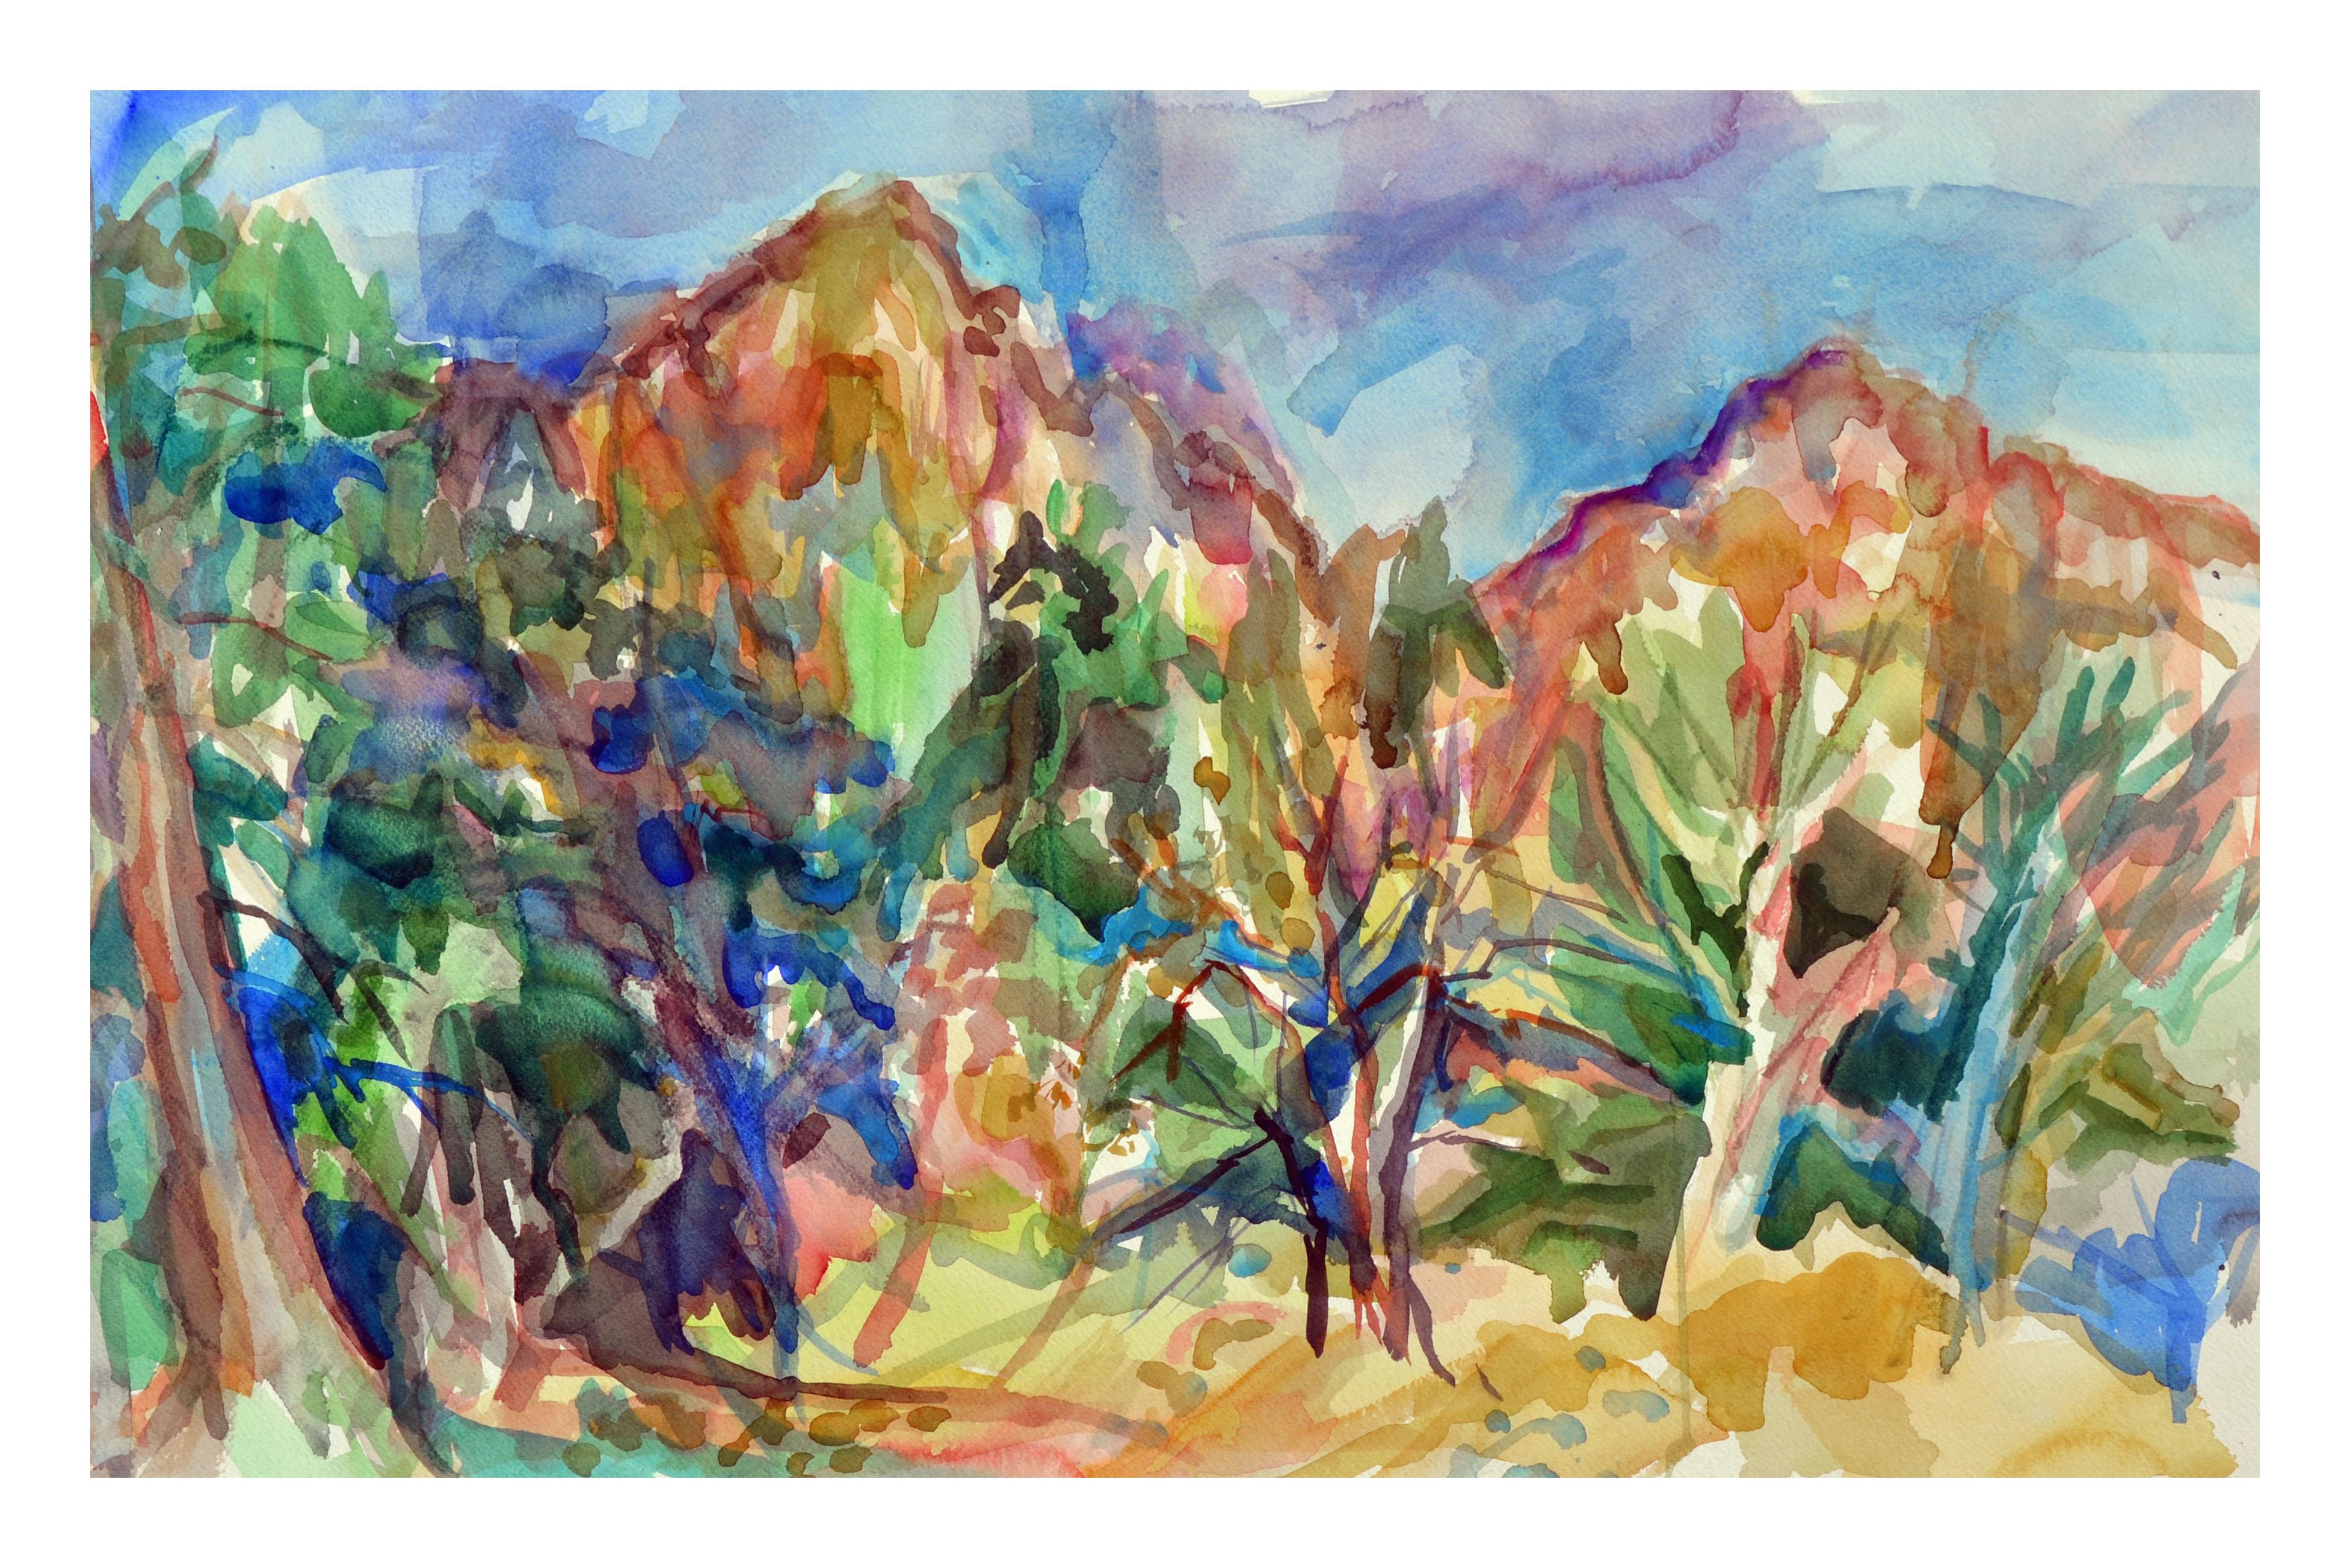 Abstracted Mountain Range Landscape - Art by Virginia J. Hughins